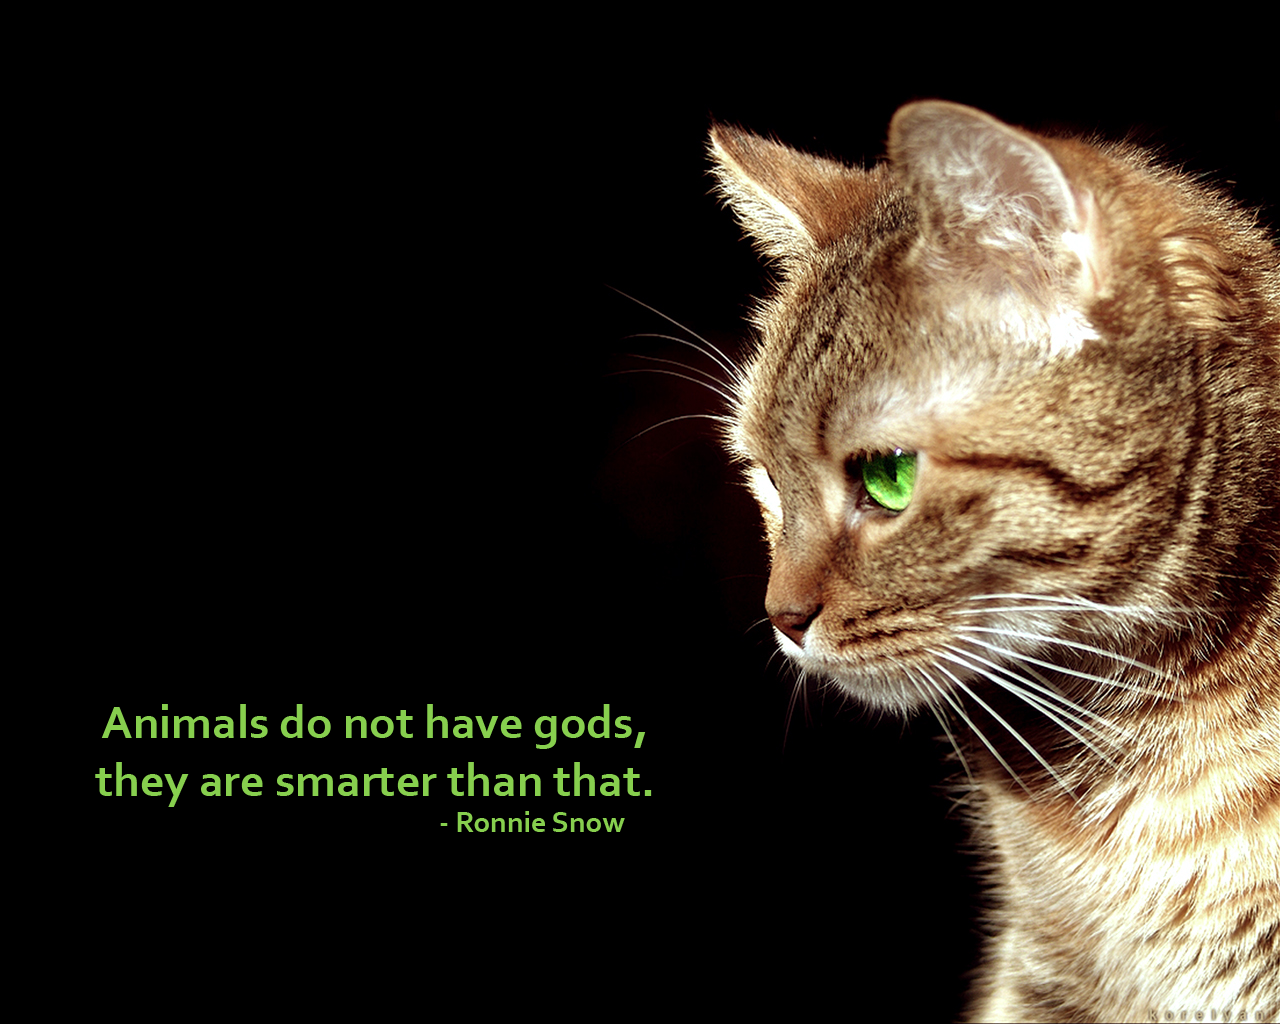 Animal Rights Image HD Wallpaper And Background Photos